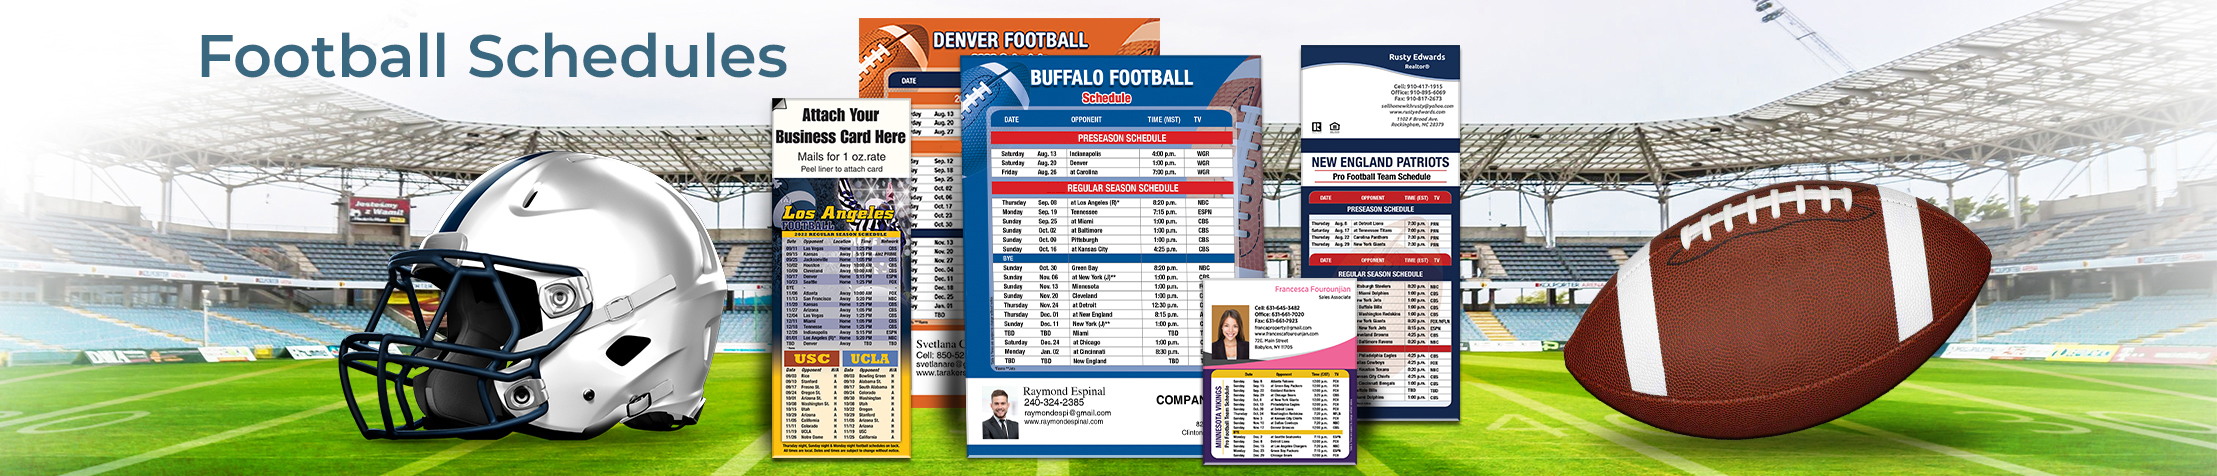 Coldwell Banker Real Estate Football Schedules - CB  personalized football schedules | BestPrintBuy.com